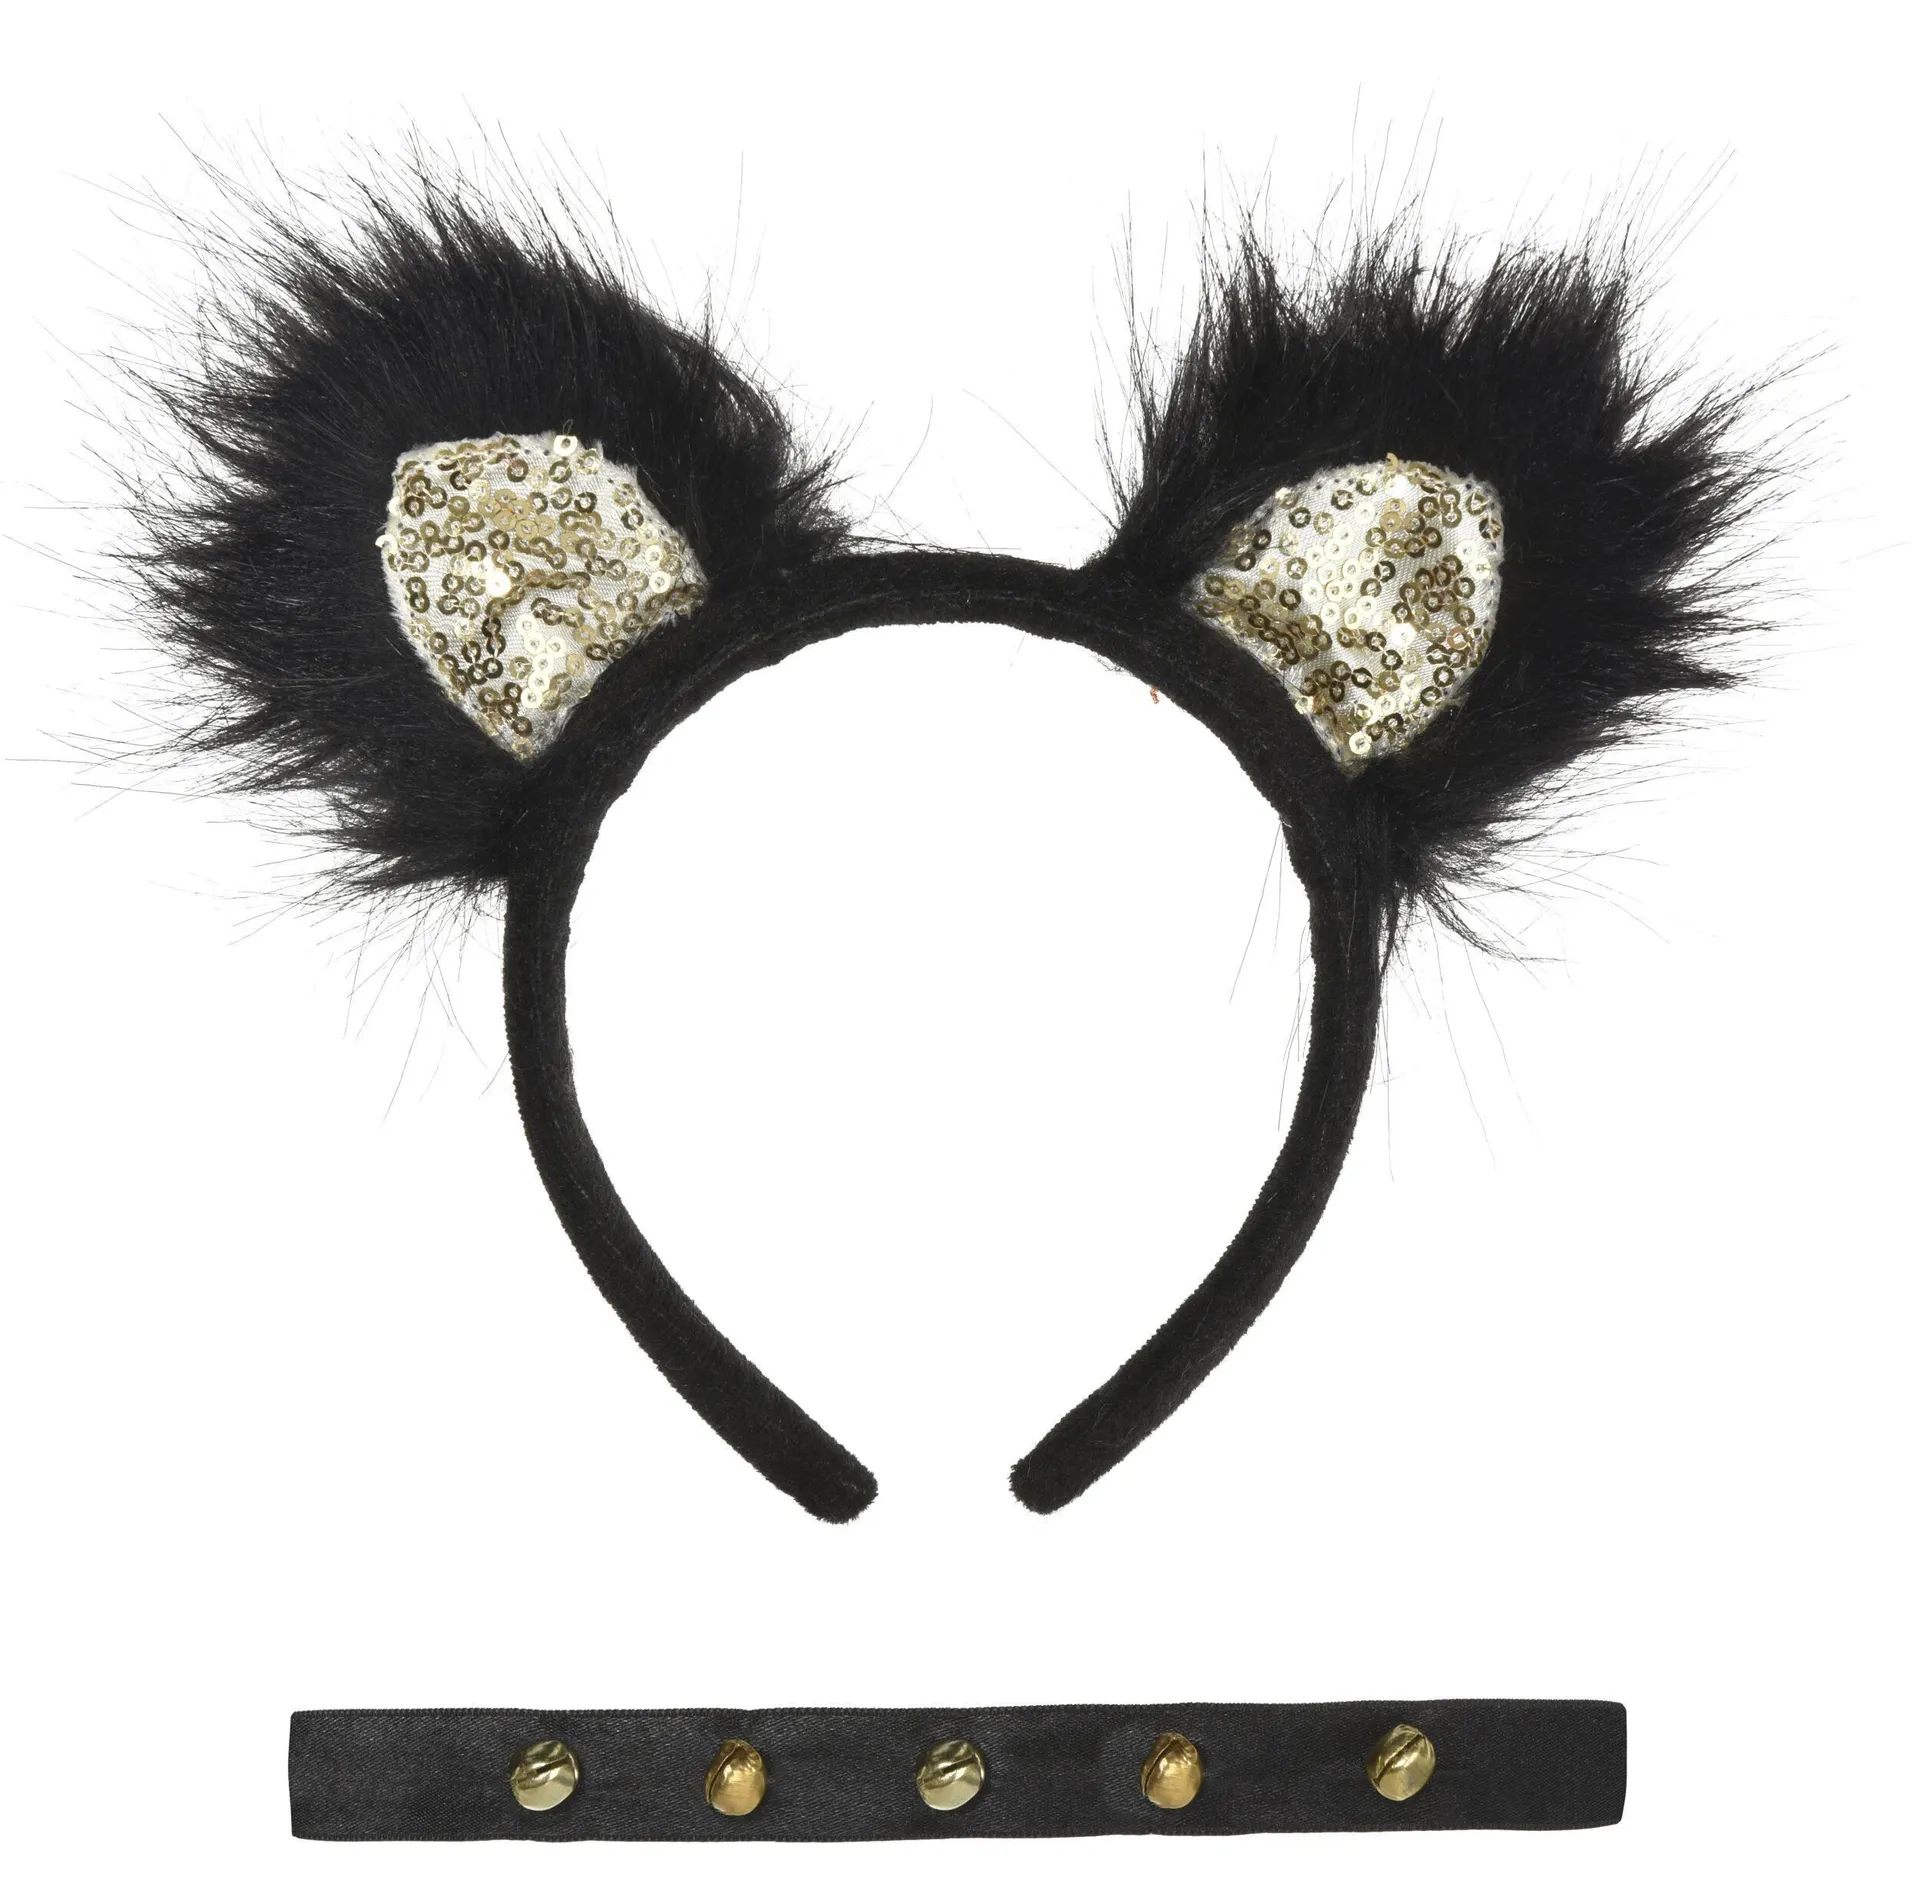 Sequin Fuzzy Honey Cat Ears Headband, Black/Gold, One Size, Wearable Costume Accessory for Halloween